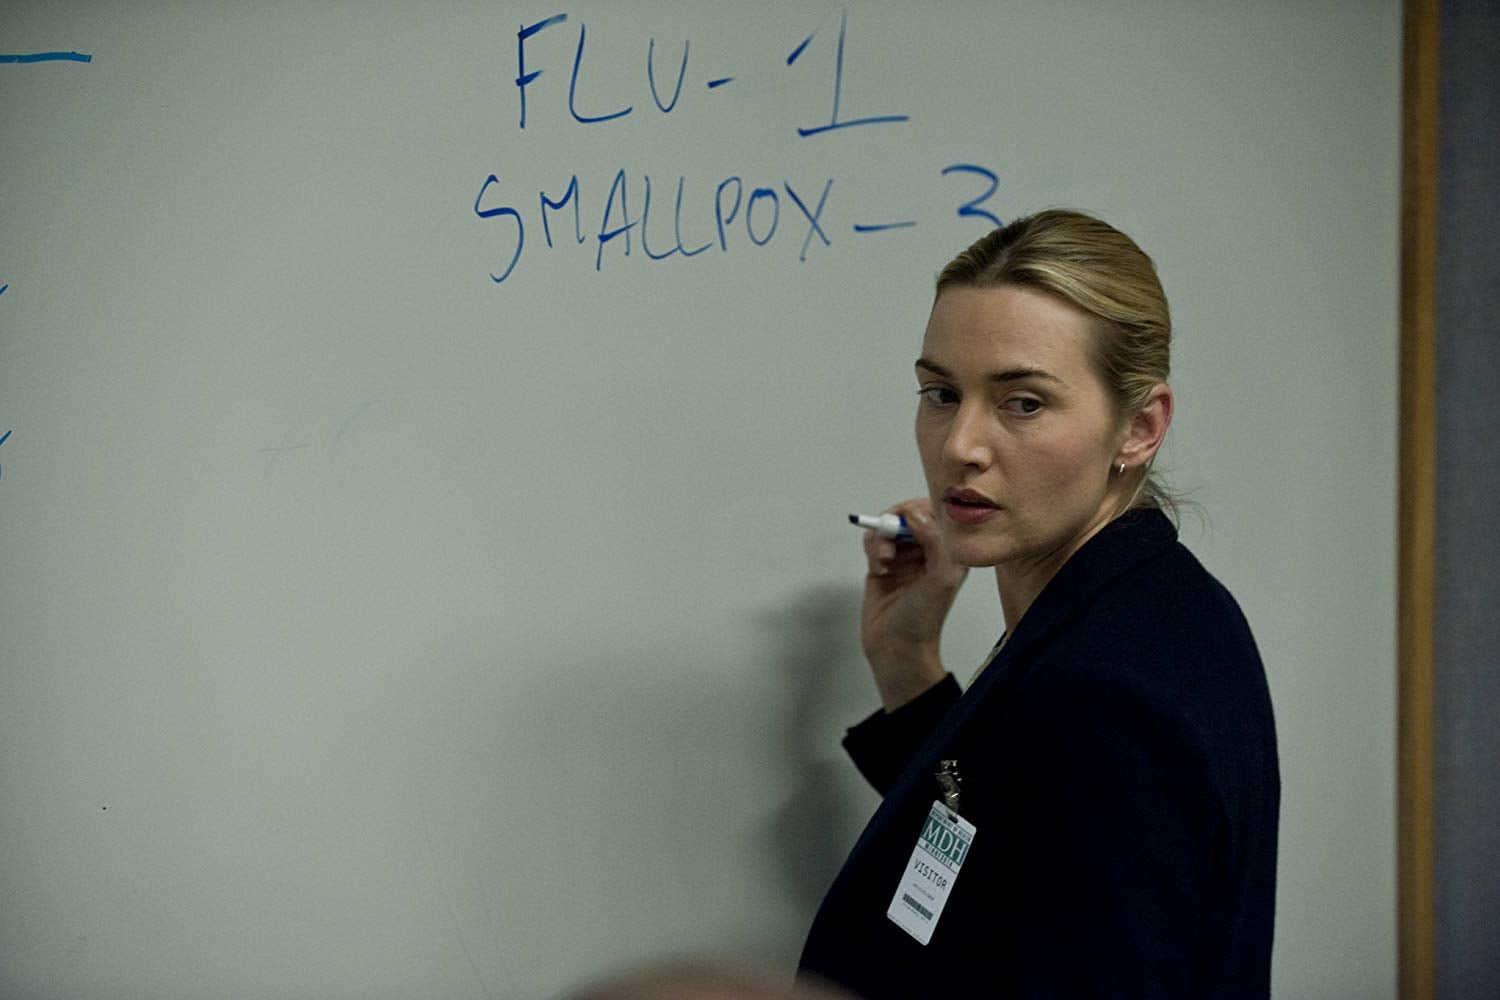 Kate Winslet holds a marker up in front of a whiteboard. The whiteboard says "FLU - 1, SMALLPOX - 3."